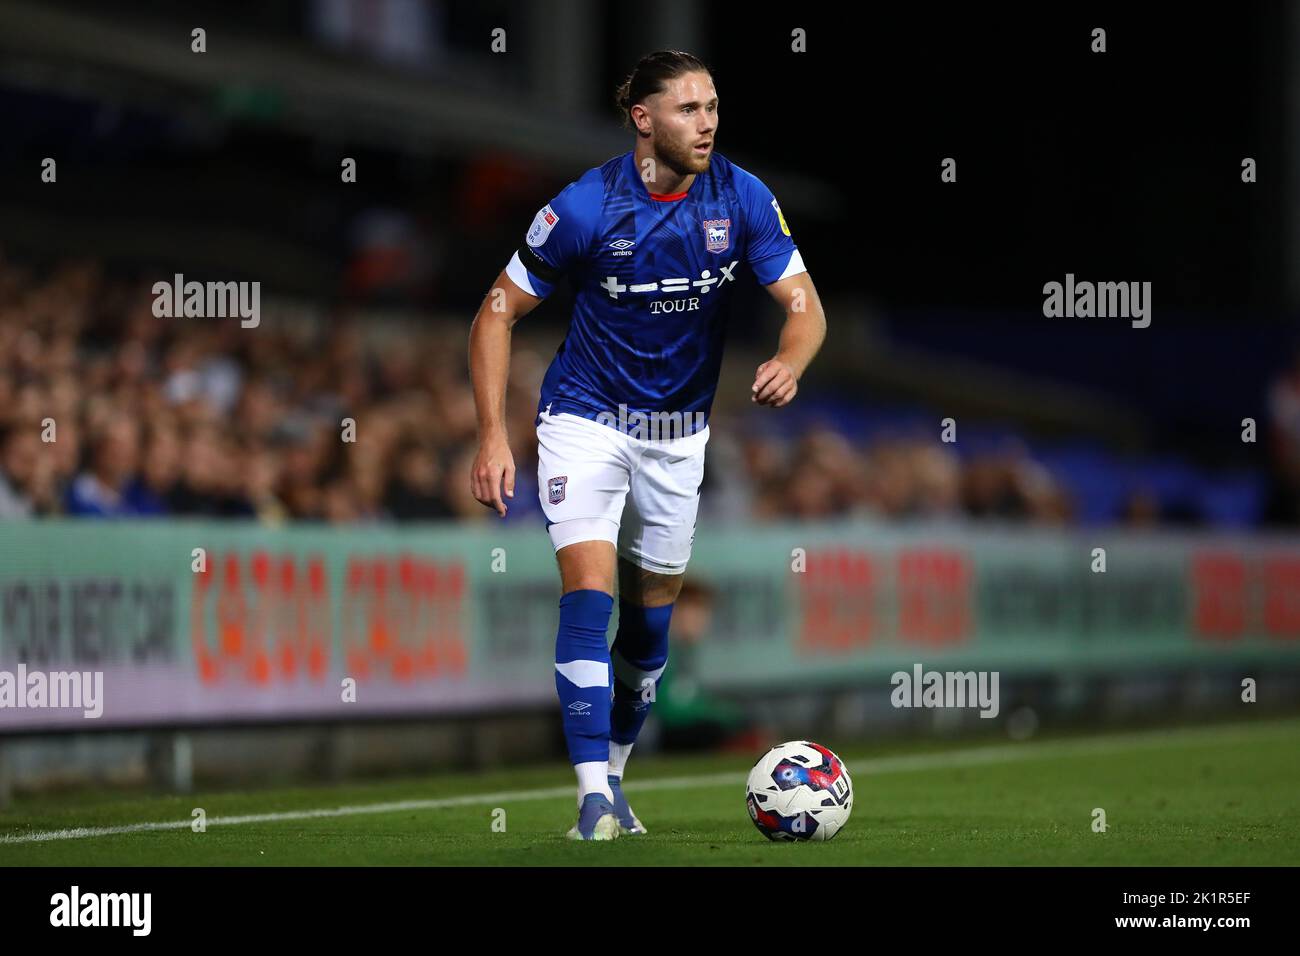 Wes Burns of Ipswich Town - Ipswich Town v Bristol Rovers, Sky Bet League One, Portman Road, Ipswich, UK - 13th September 2022  Editorial Use Only - DataCo restrictions apply Stock Photo